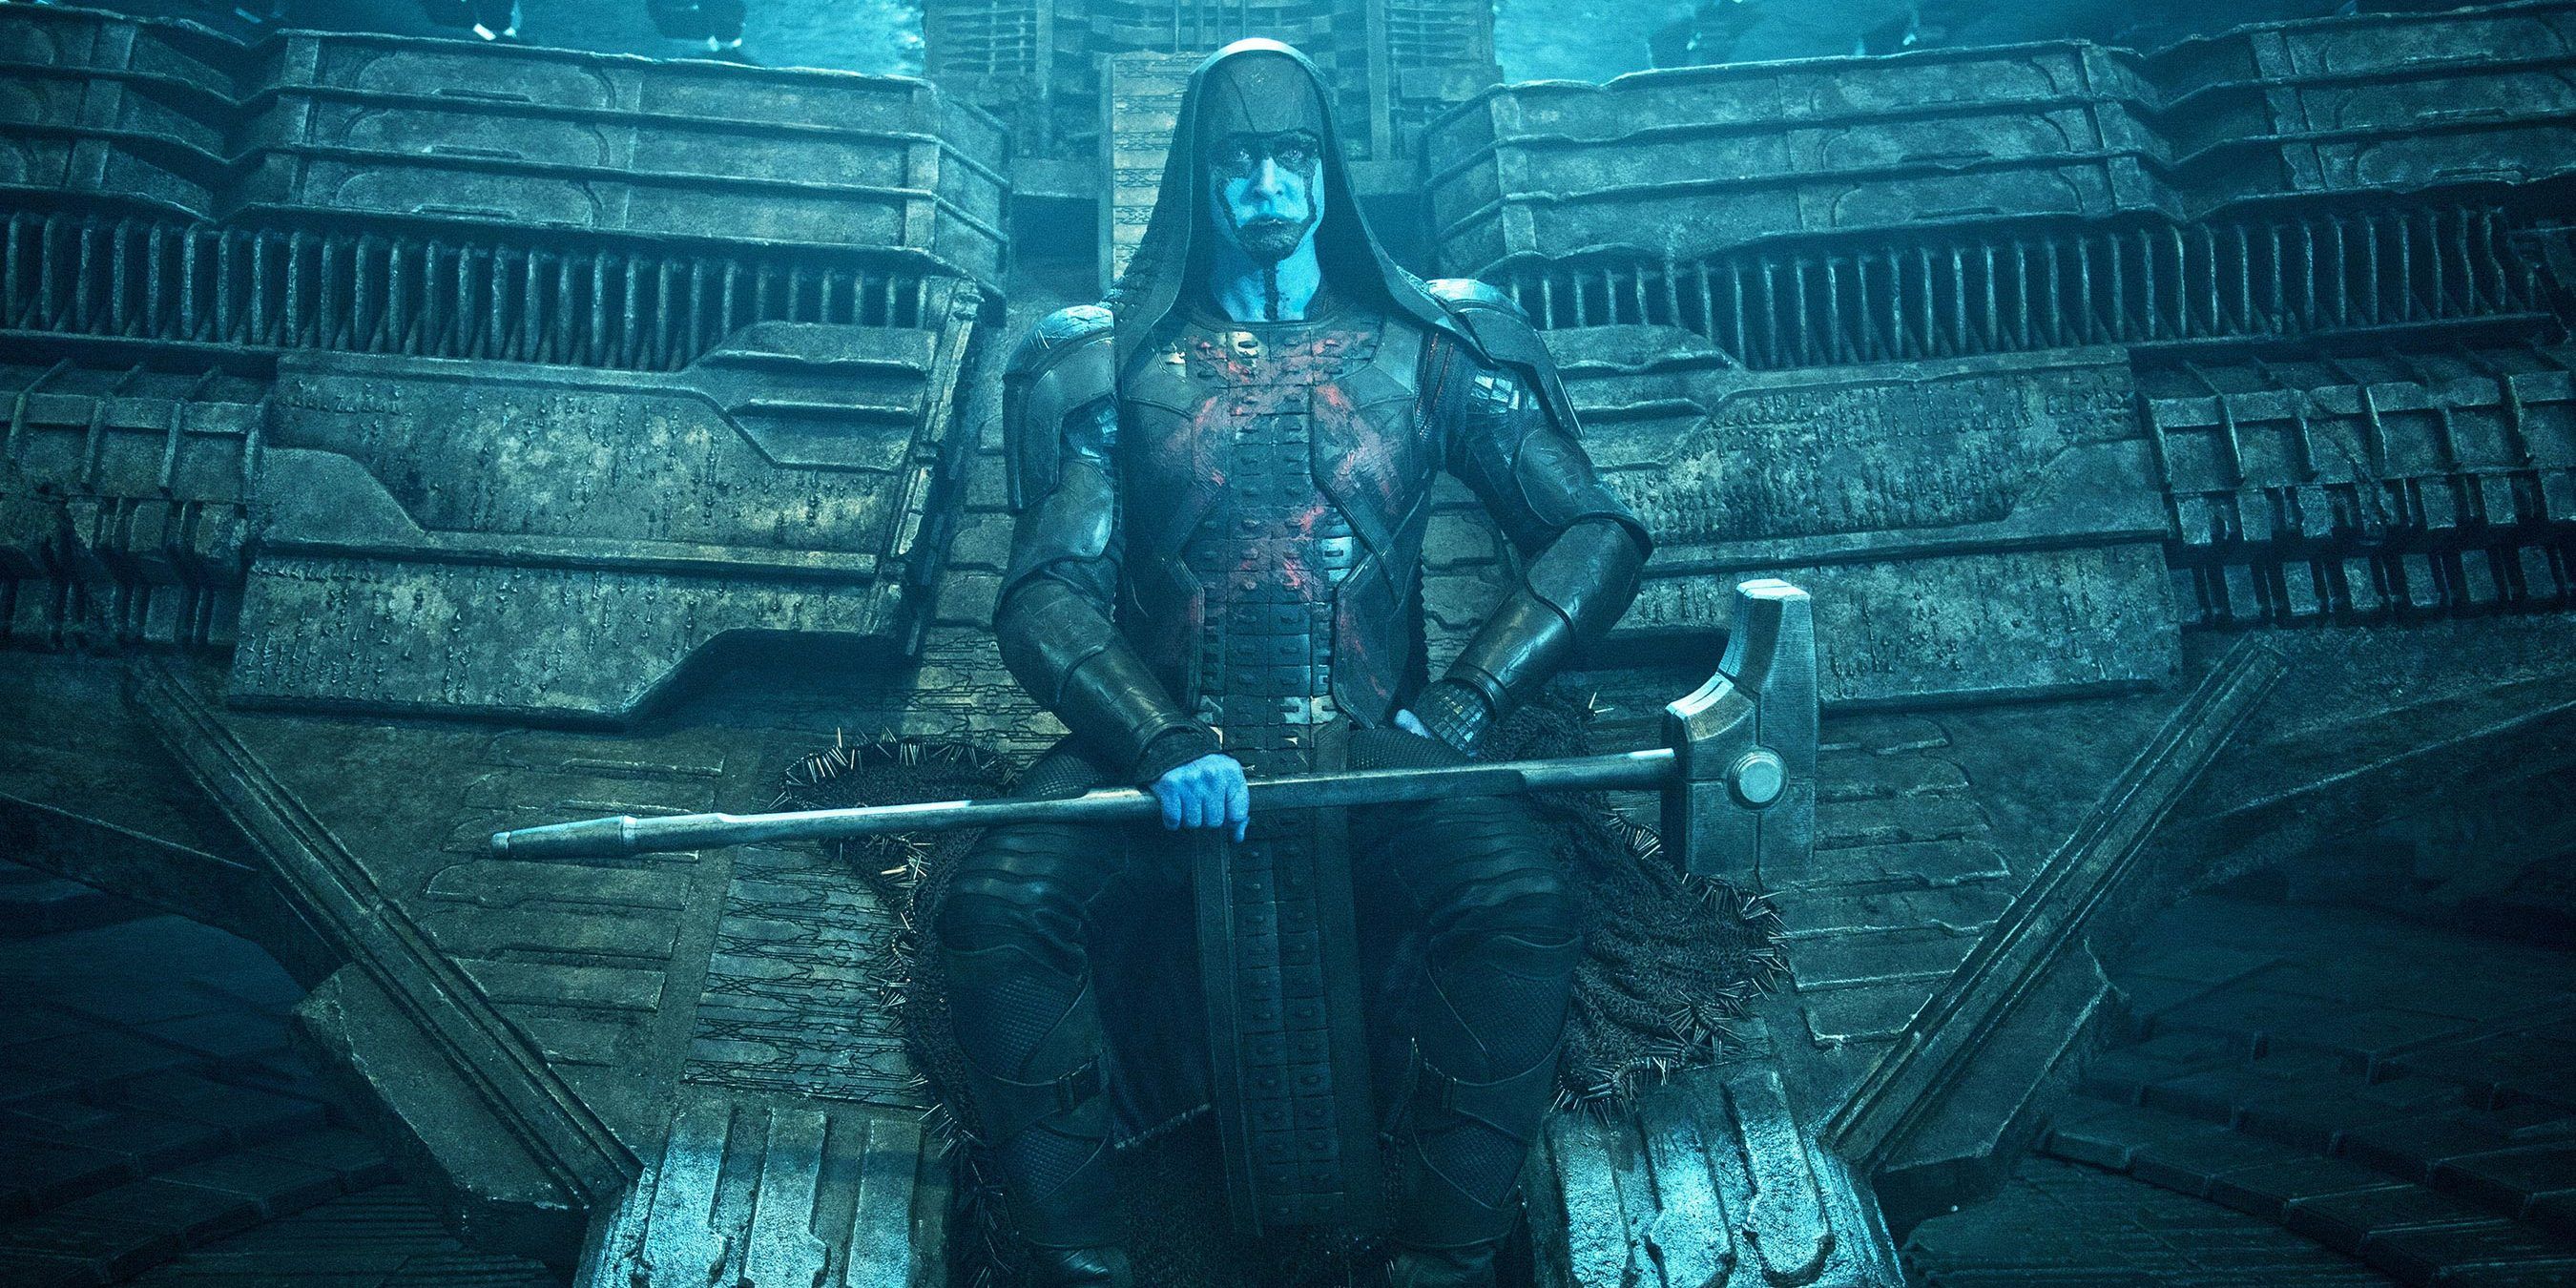 Ronan the Accuser in Guardians of the Galaxy